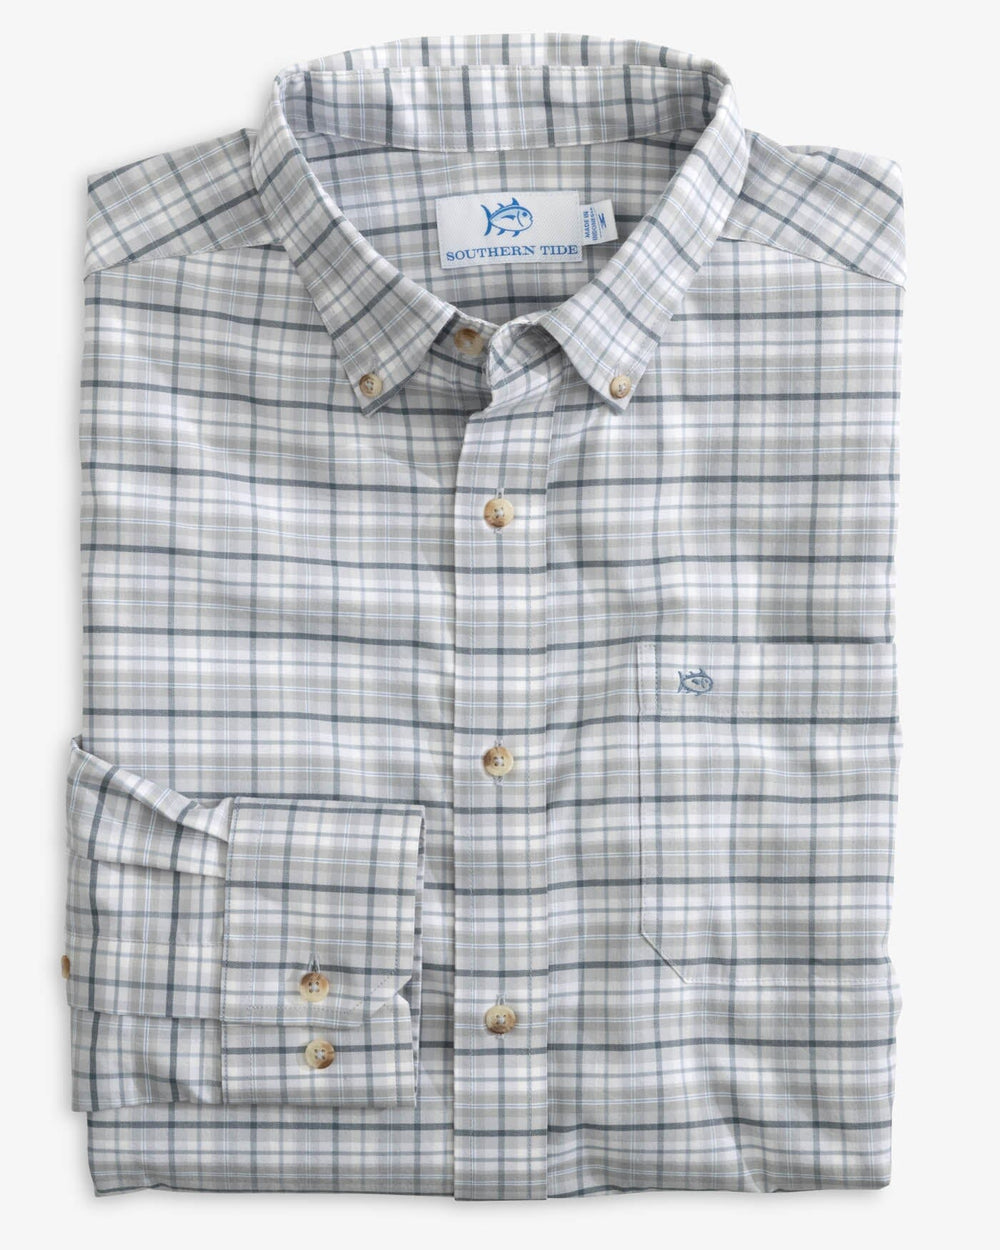 The folded view of the Southern Tide Coastal Passage Patton Plaid Sport Shirts by Southern Tide - Platinum Grey